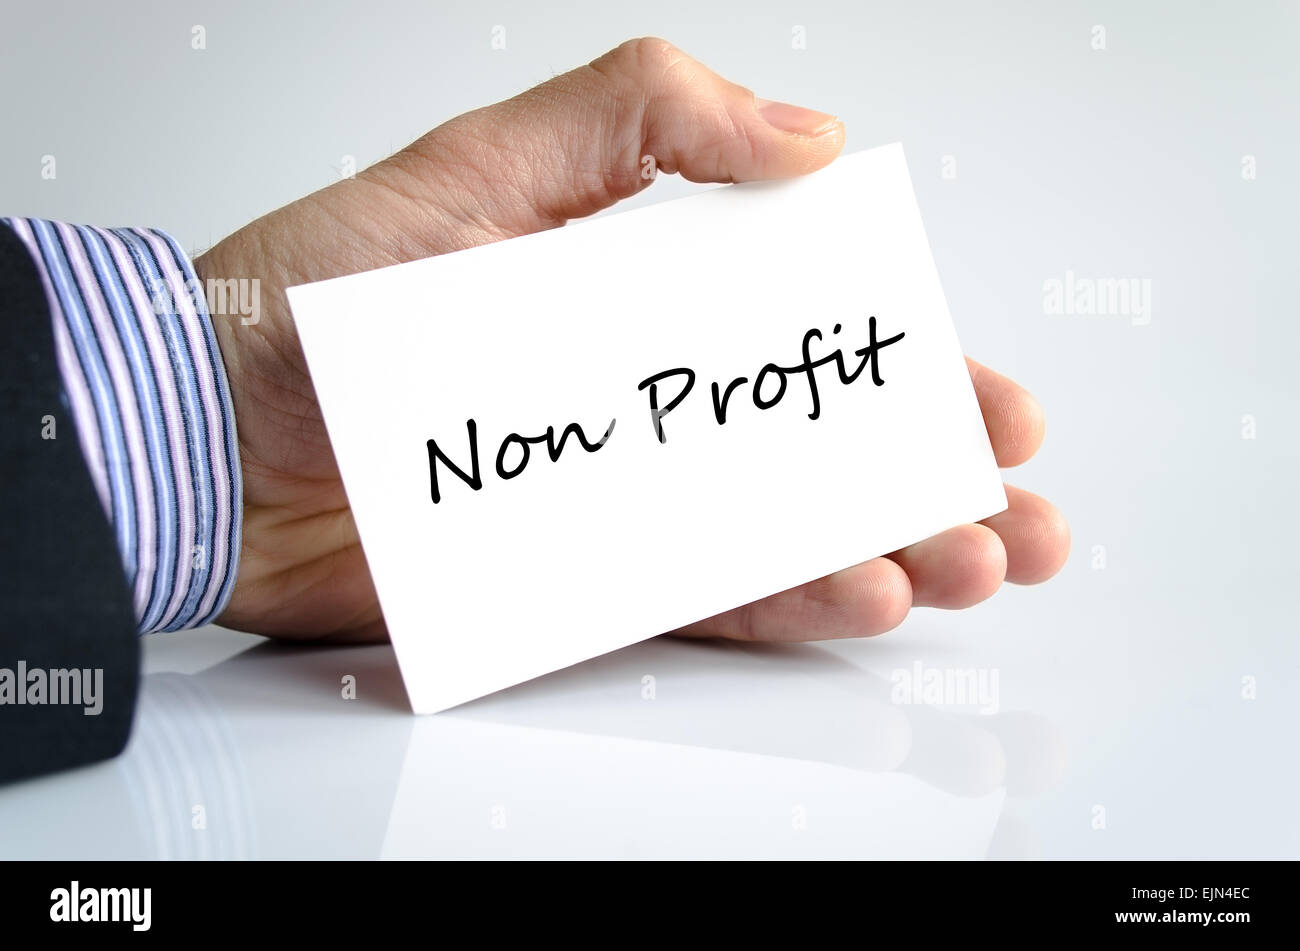 Non Profit note in bussines man hand - business concept Stock Photo